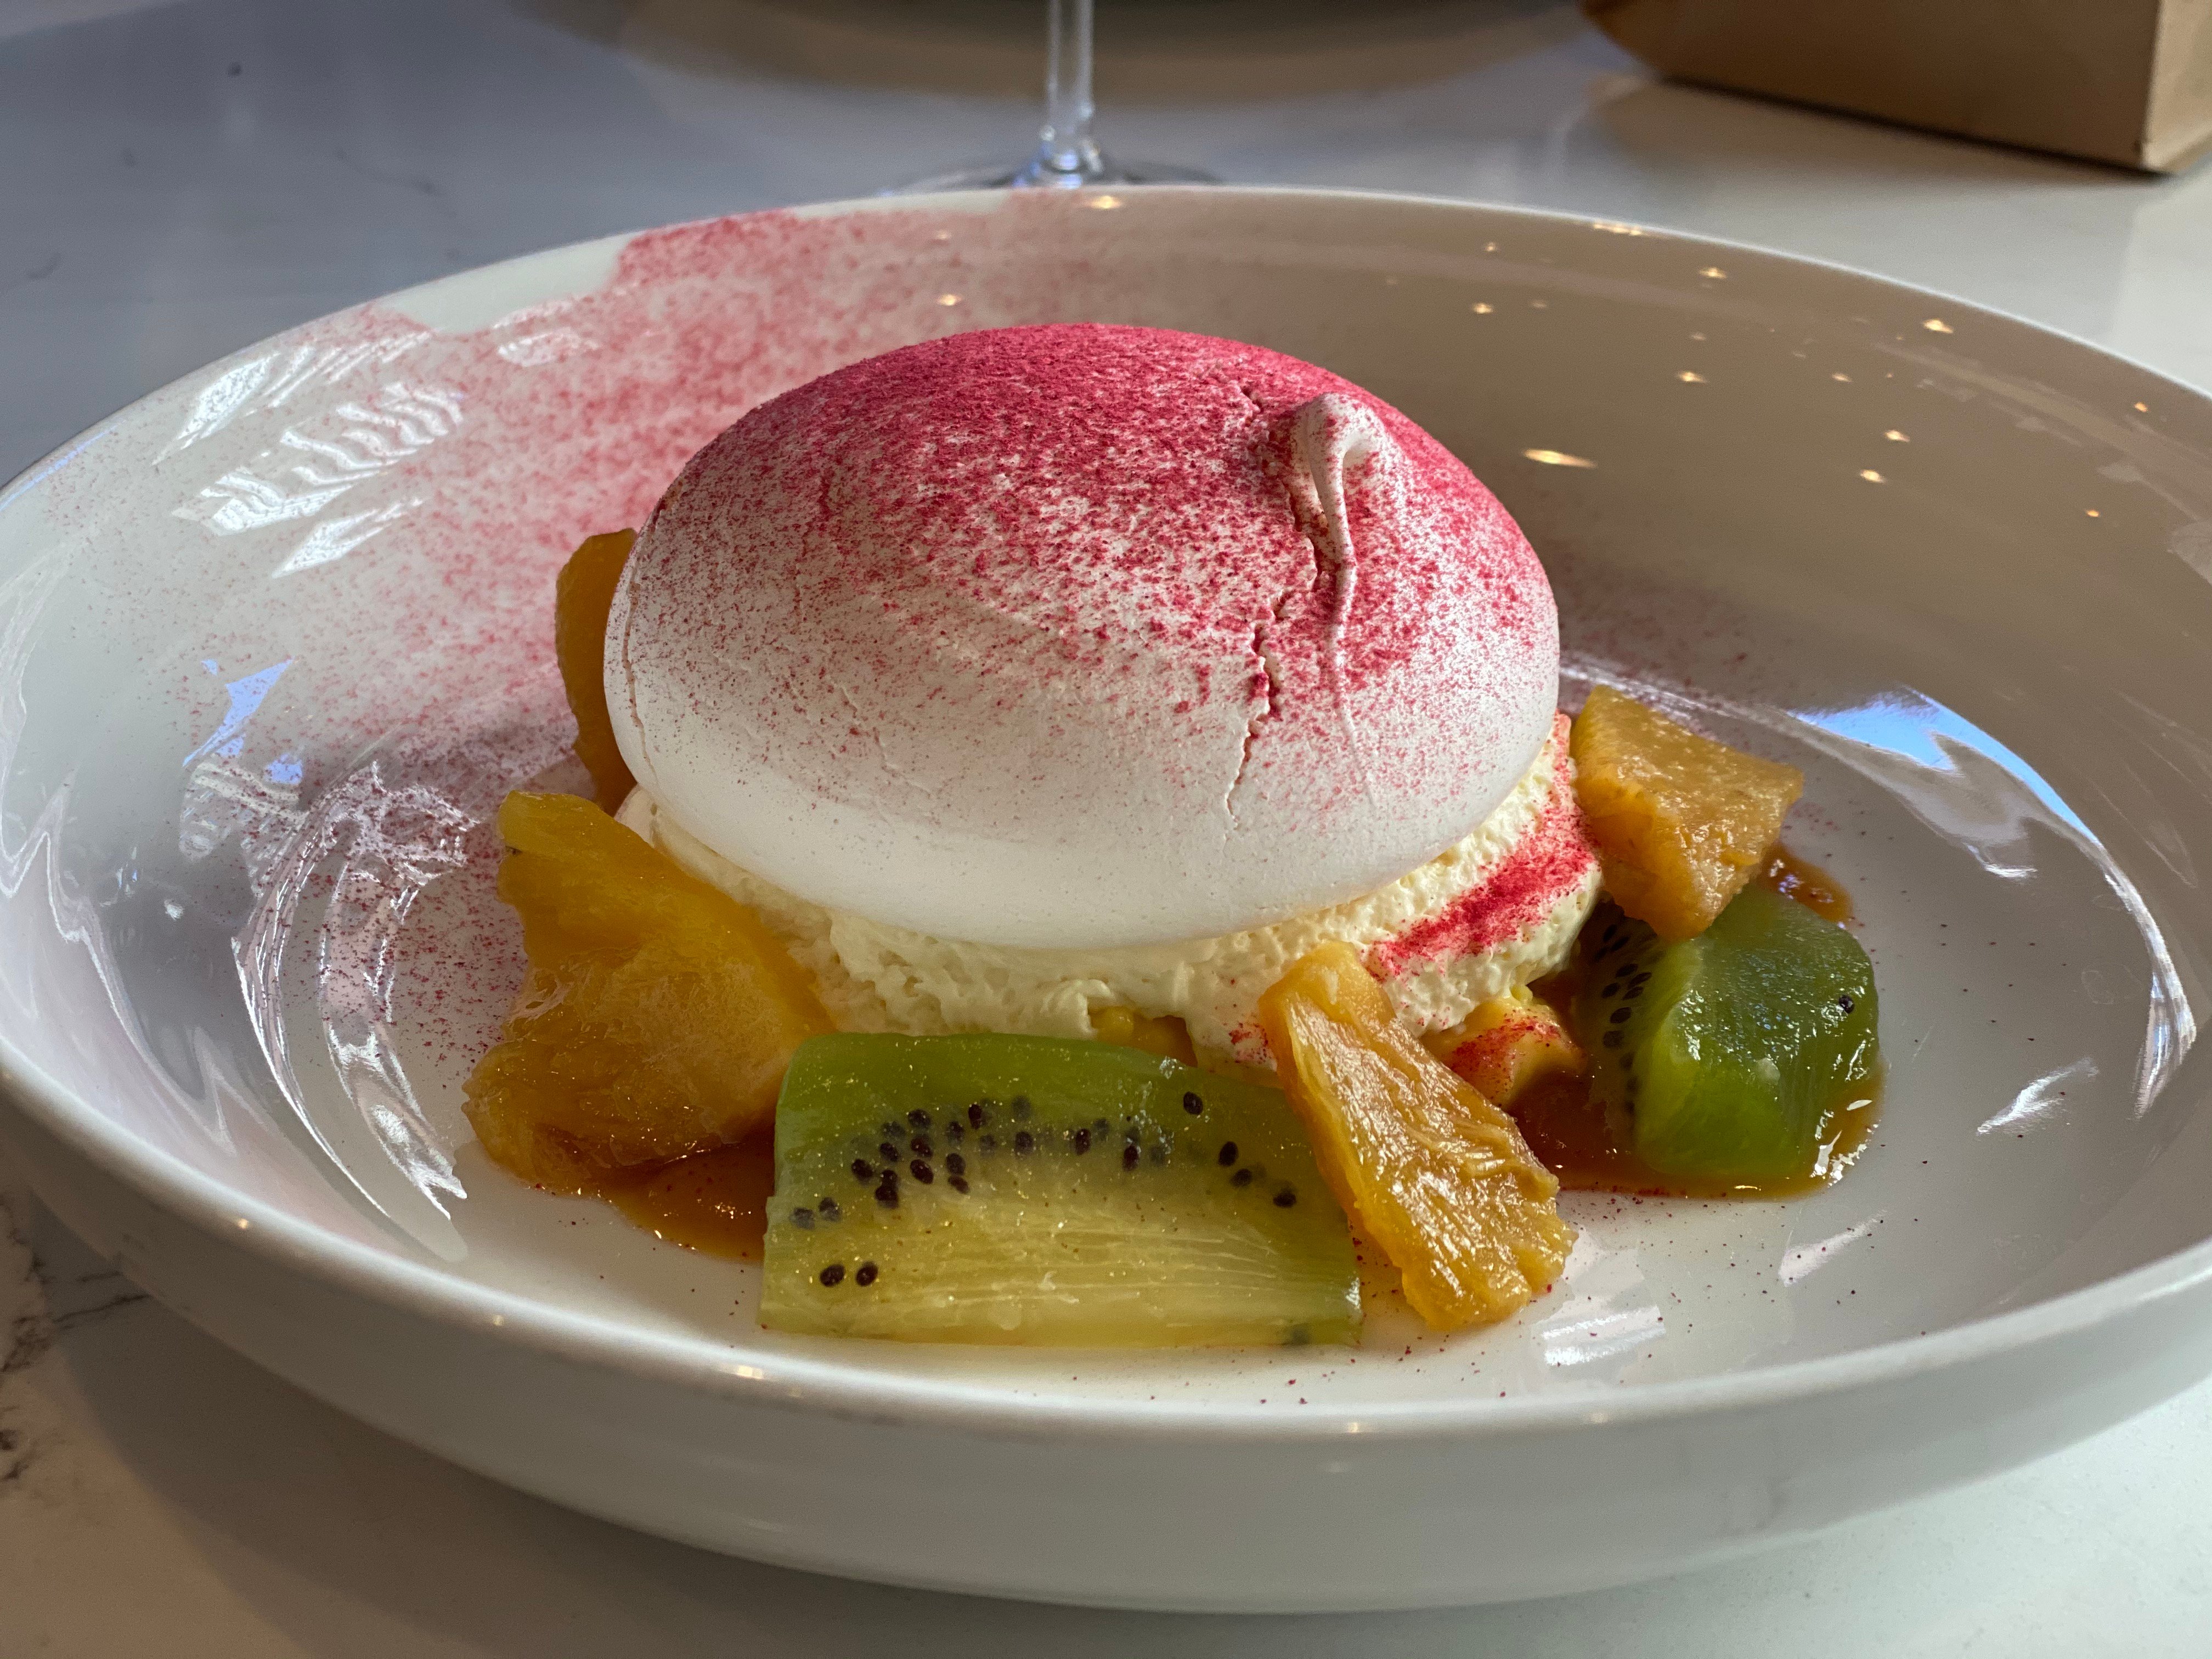 Pastry Chef Alisha Ivey made this Pavlova at il Solito in PDX